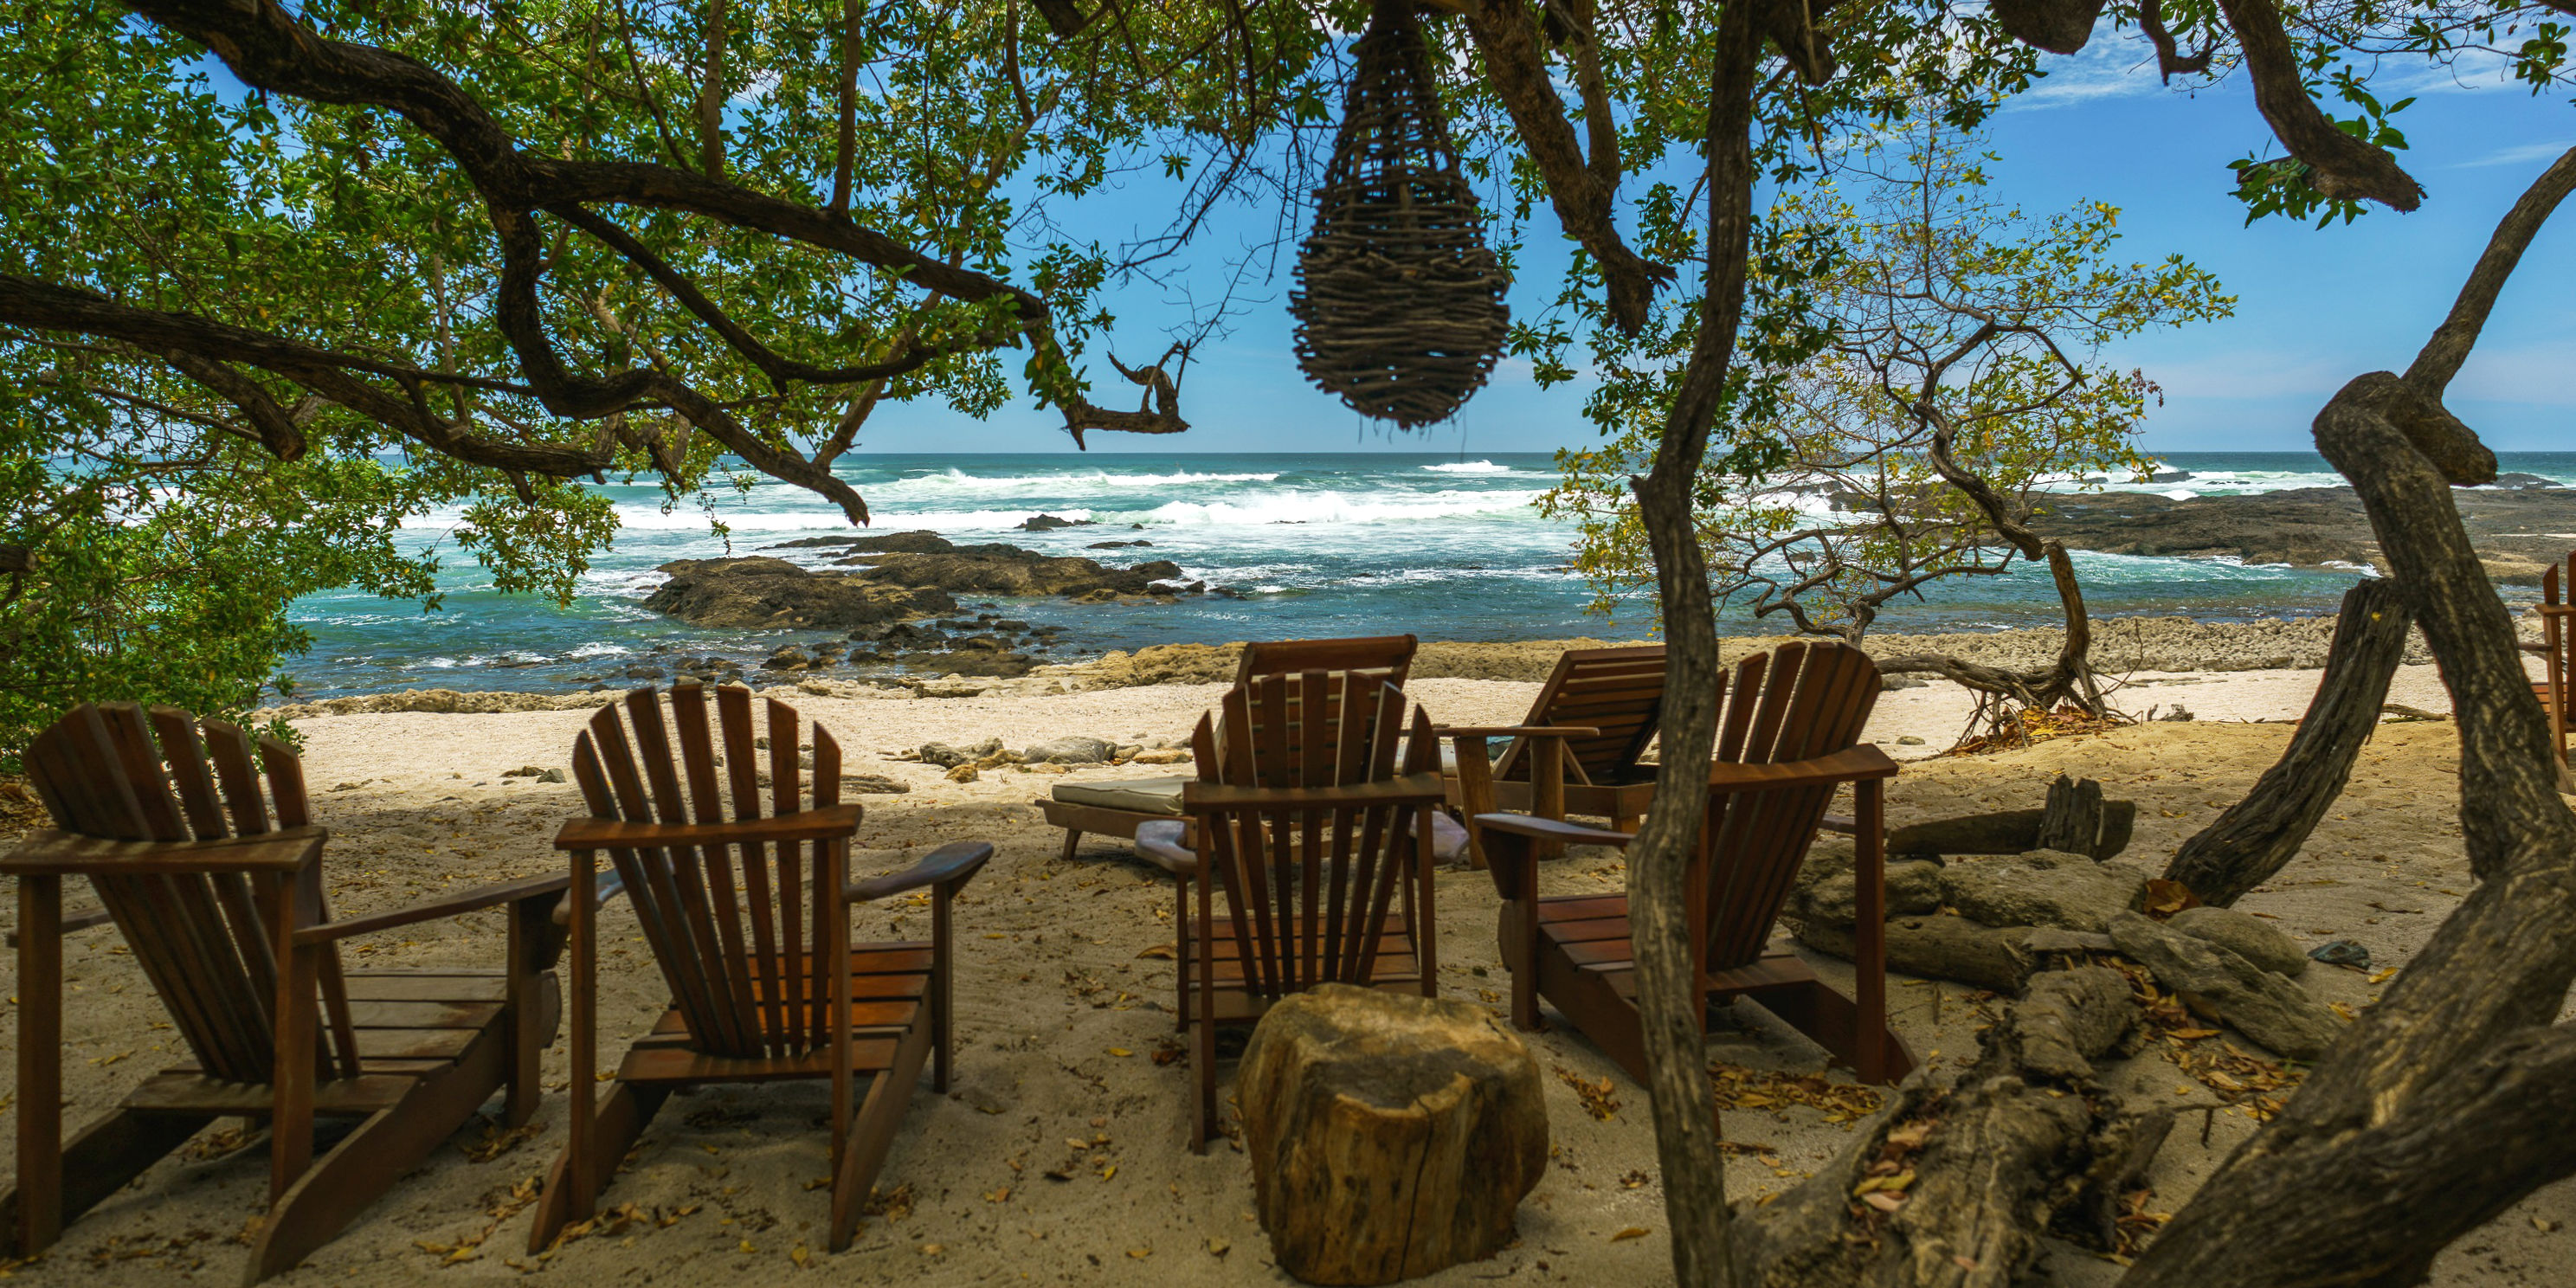 This beachside resort in Costa Rica may seem idyllic, but the habitat loss required for its construction poses a threat to Costa Rica sea turtles.